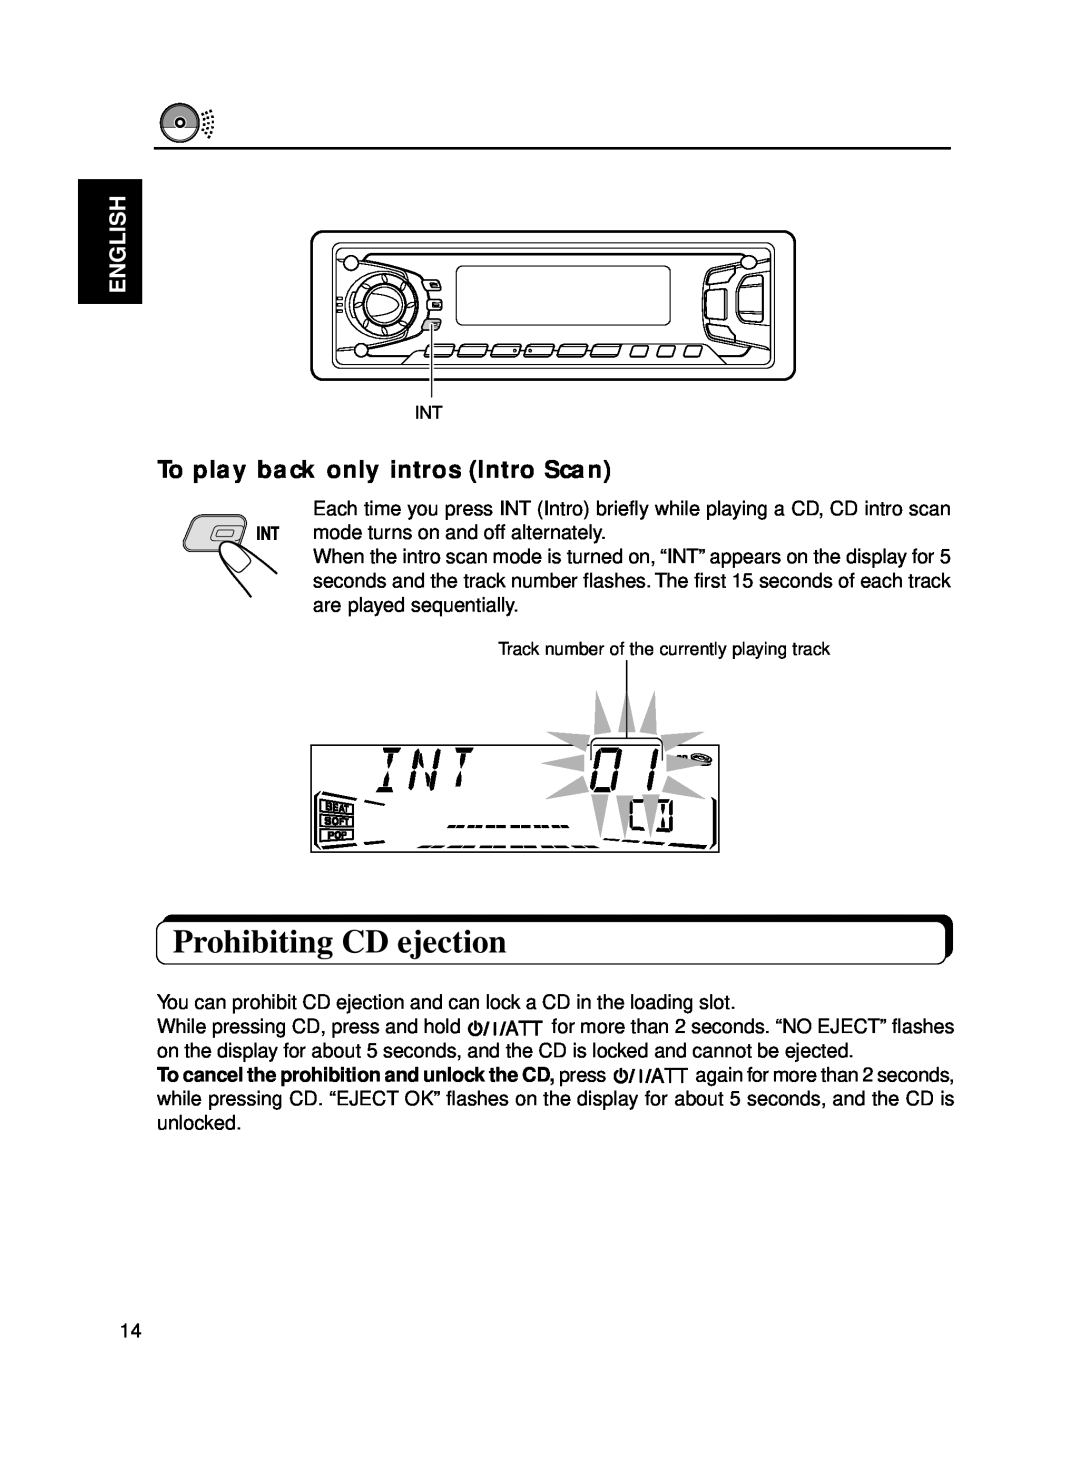 JVC KD-SX770, KD-SX870 manual Prohibiting CD ejection, To play back only intros Intro Scan, English 